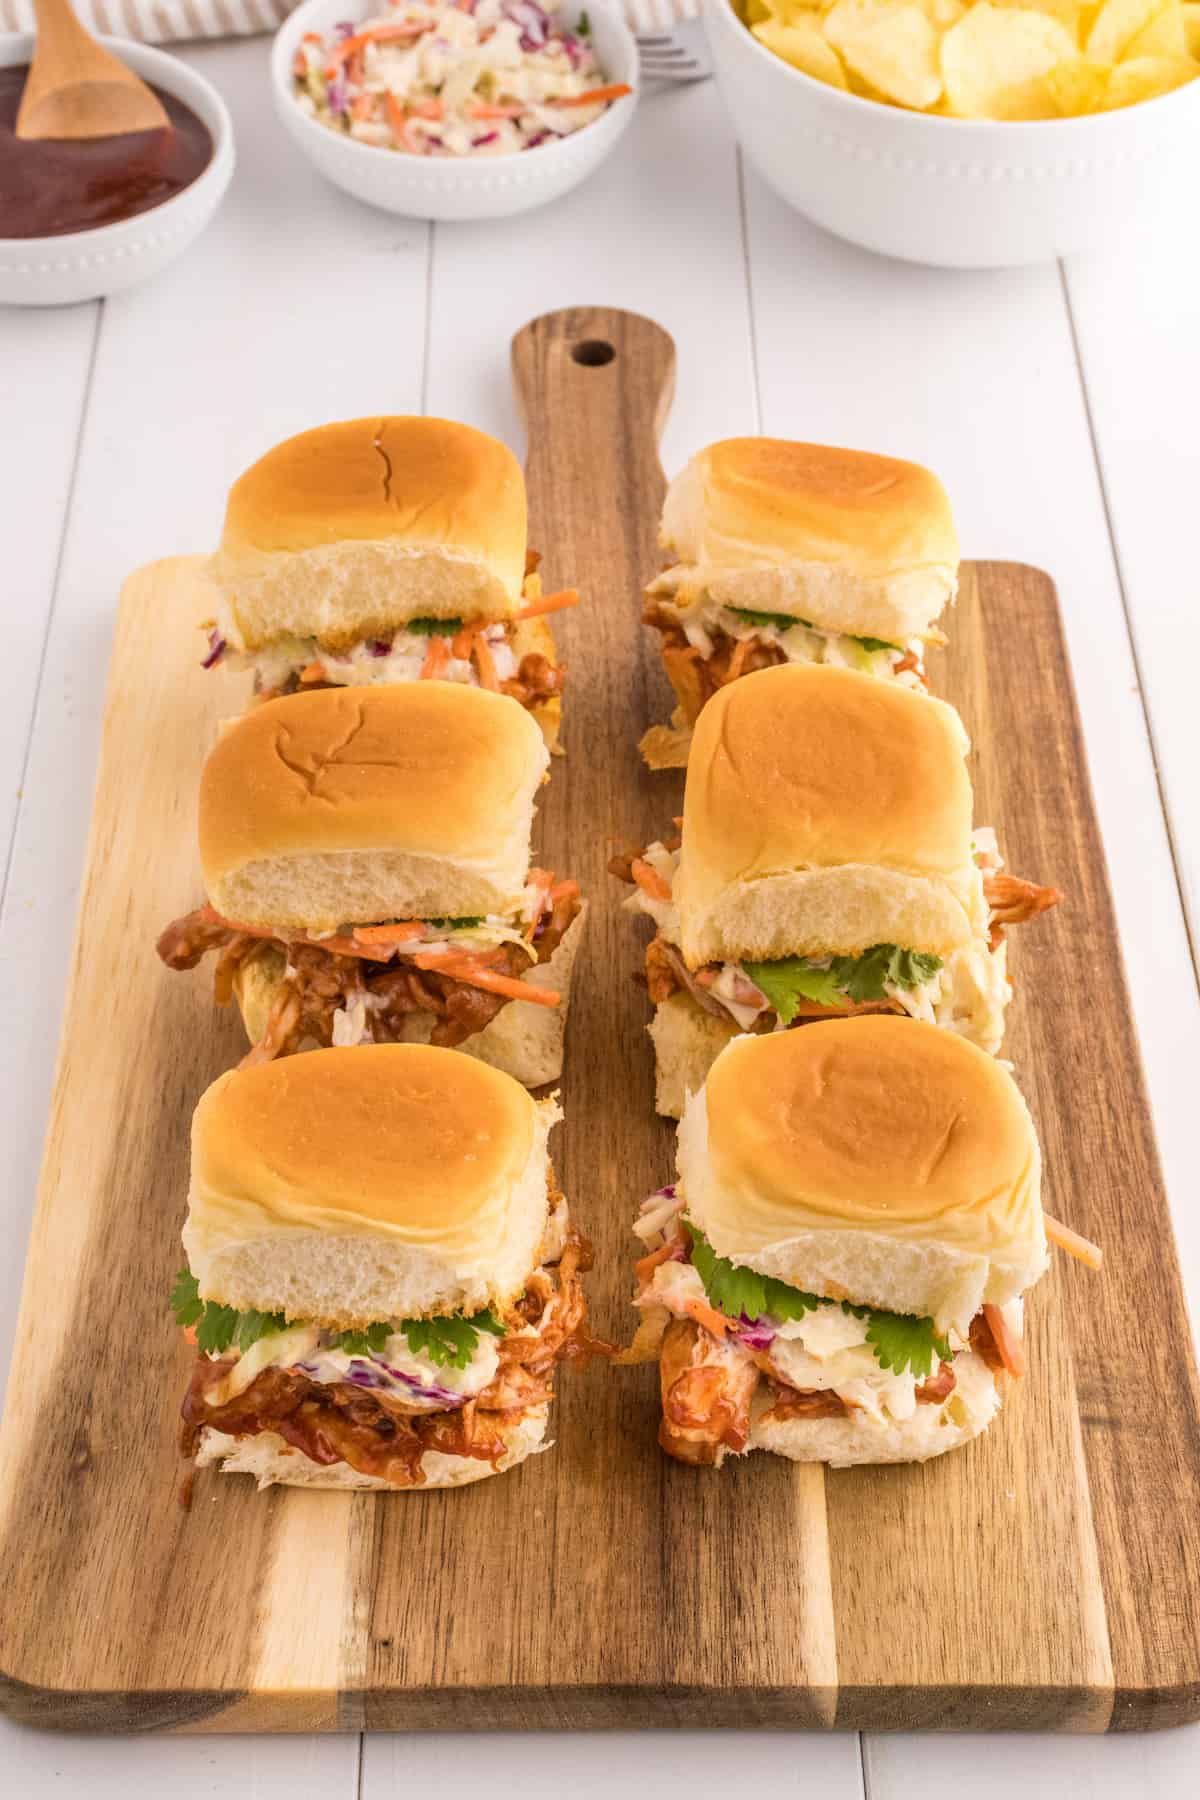 BBQ pulled pork sliders served on a rustic wooden cutting board.